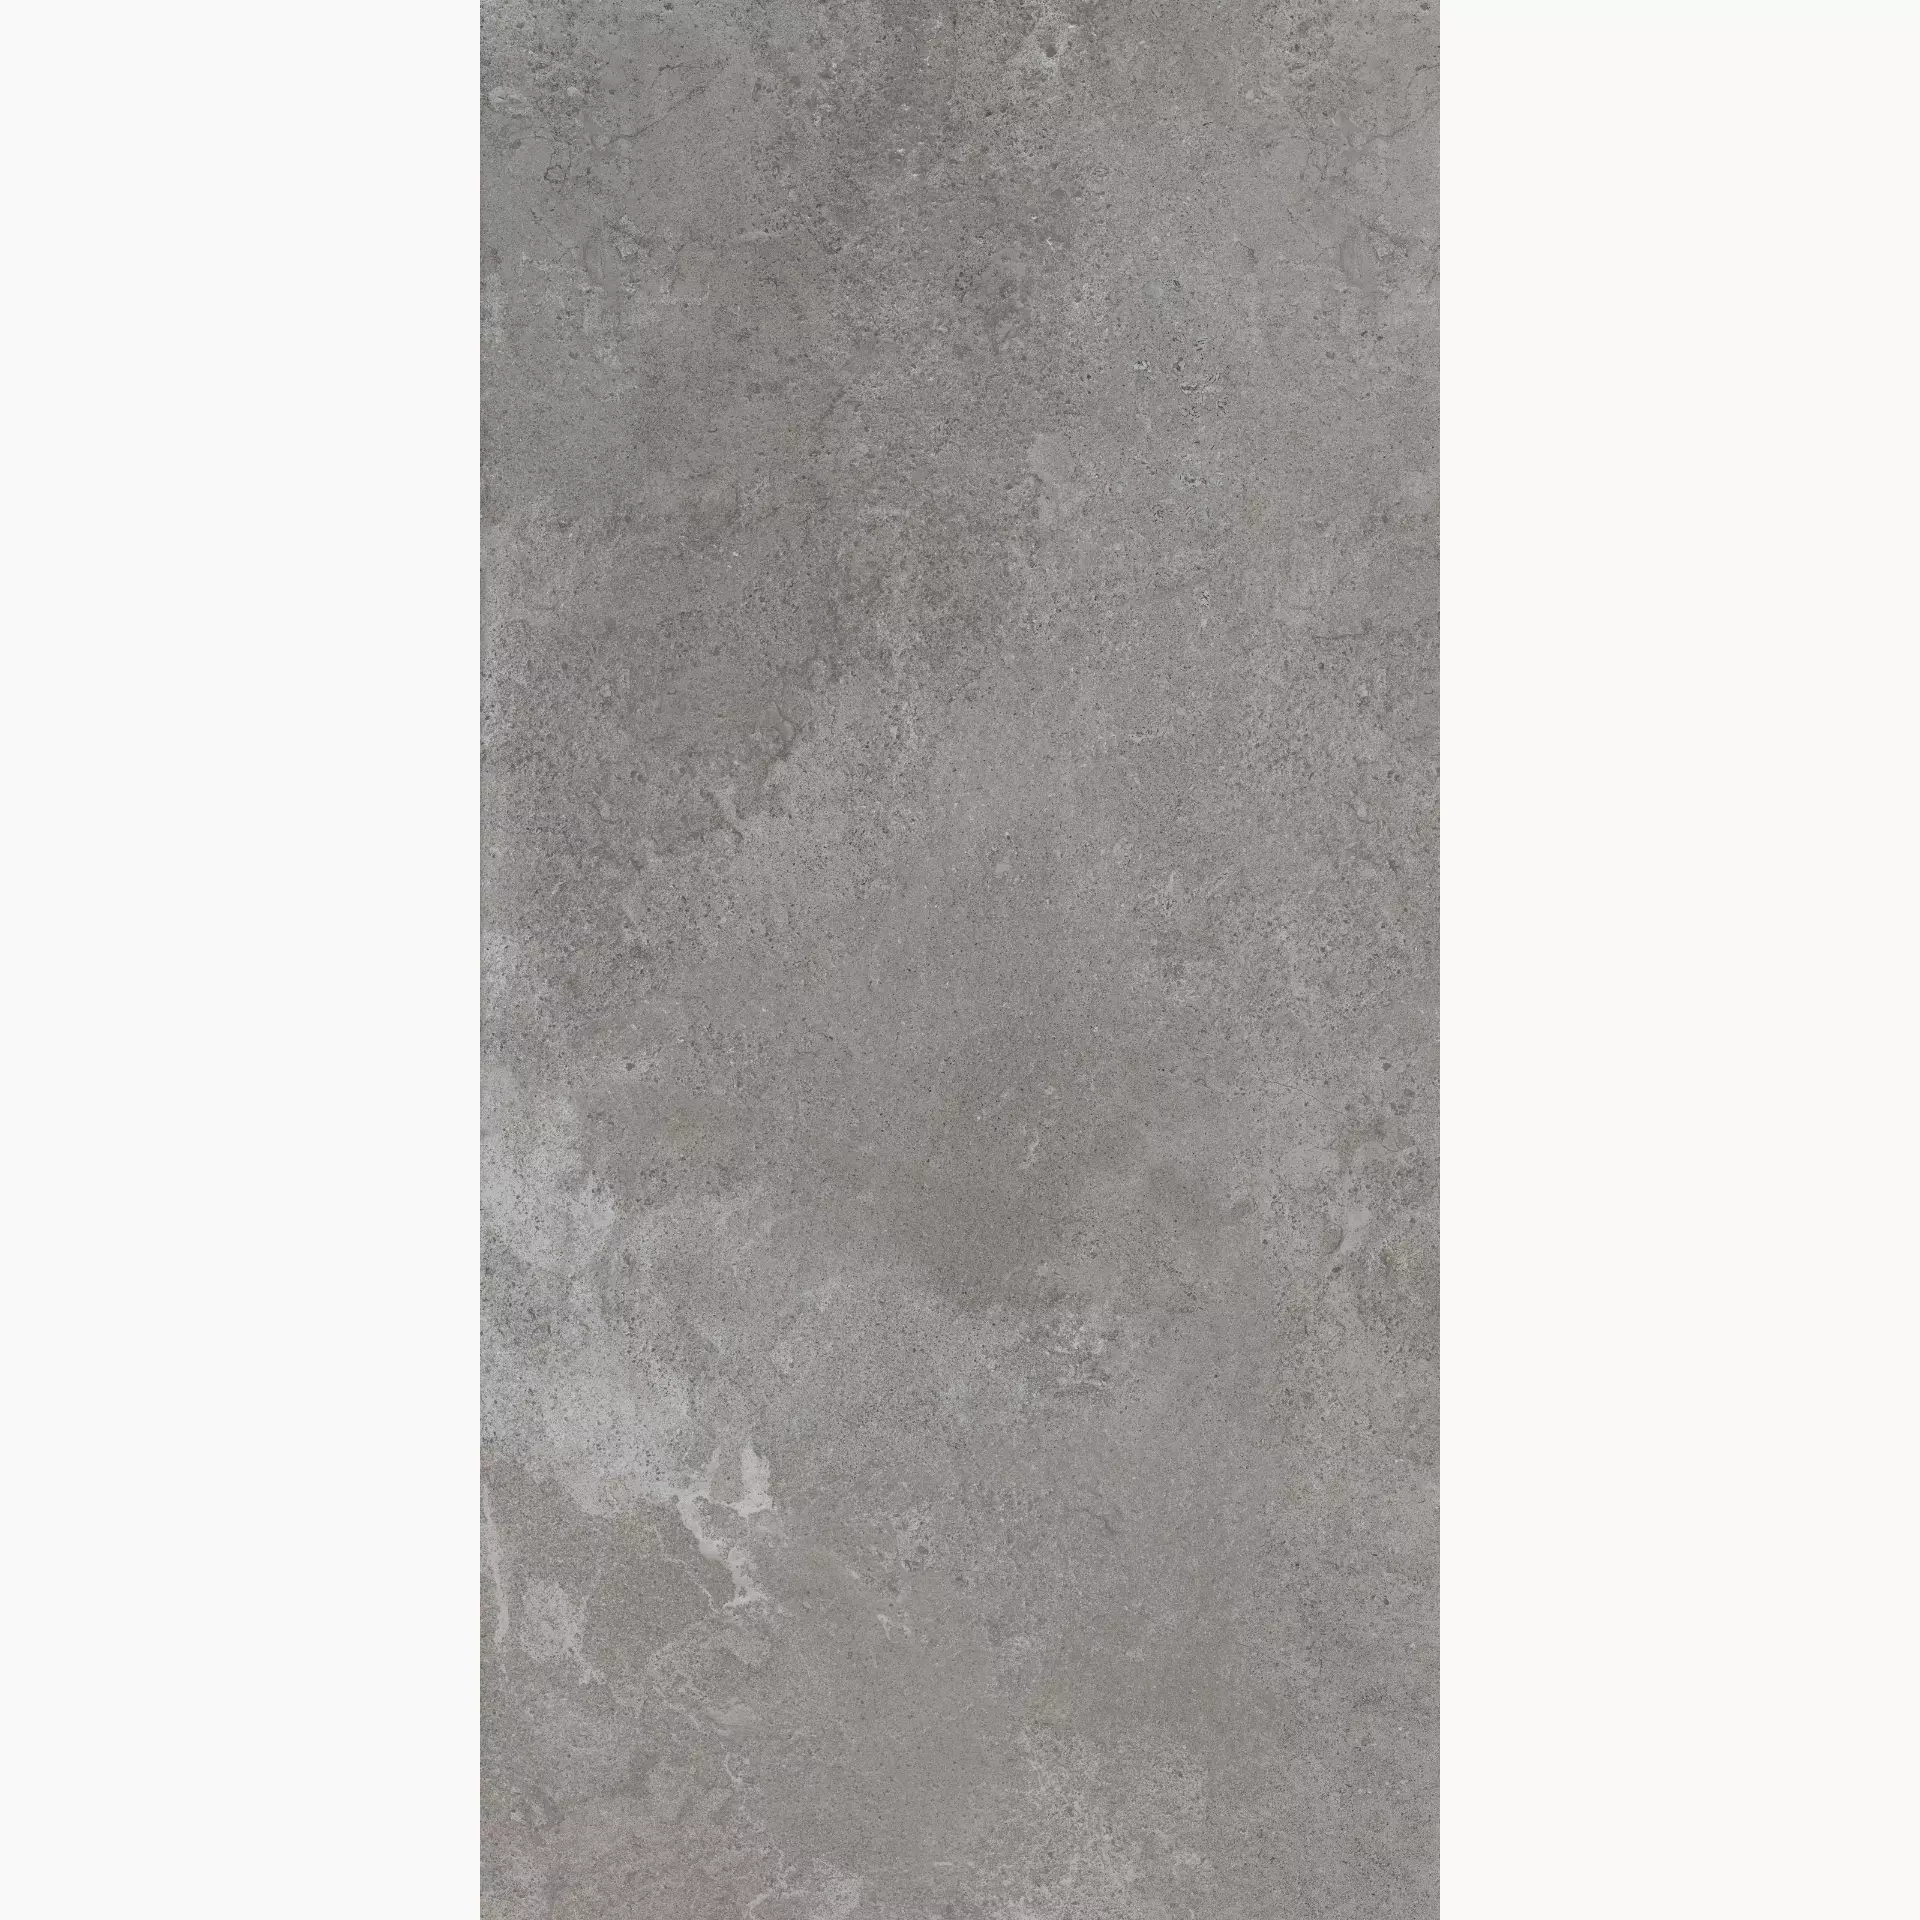 ABK Alpes Wide Lead Naturale PF60000205 80x160cm rectified 8,5mm